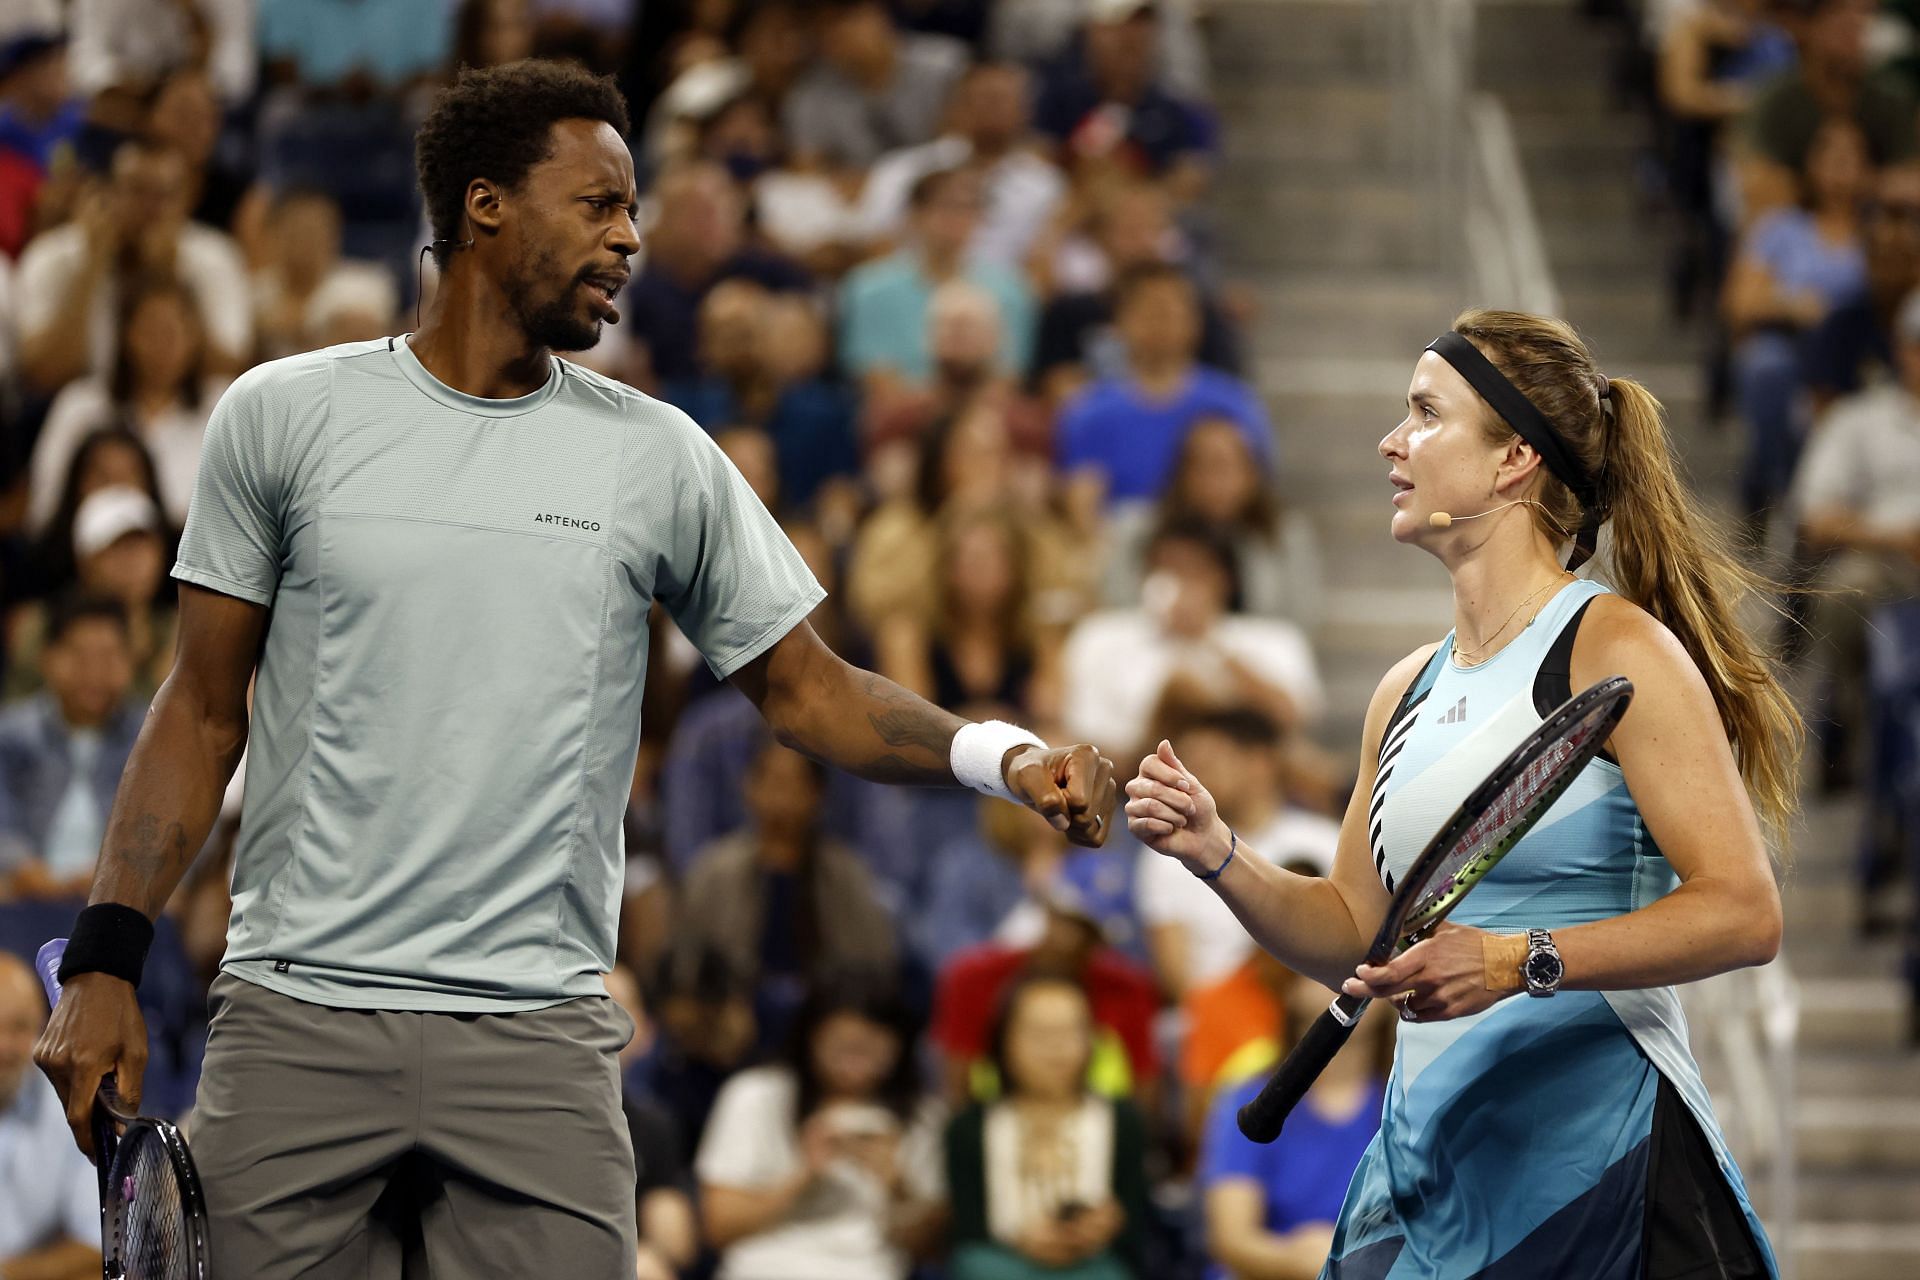 2023 US Open - Stars of the Open Exhibition Match to Benefit Ukraine Relief